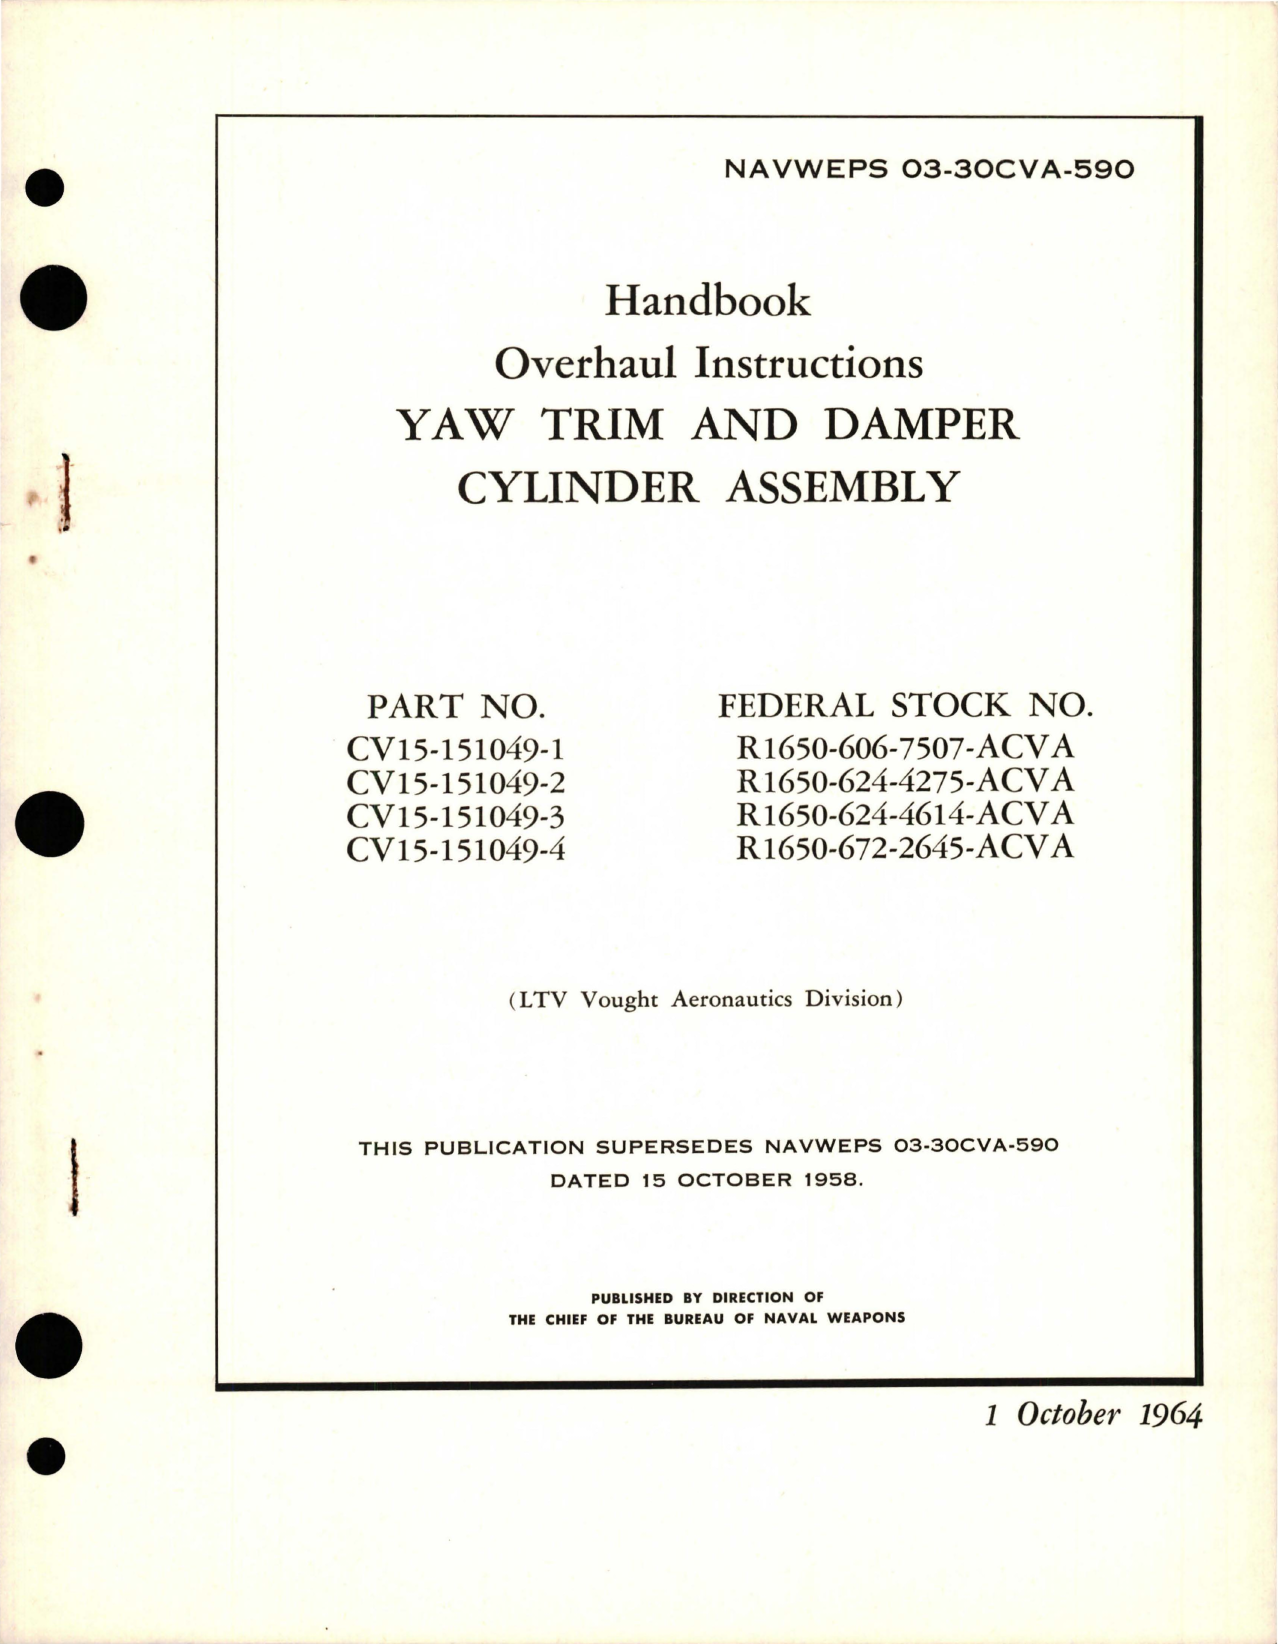 Sample page 1 from AirCorps Library document: Overhaul Instructions for Yaw Trim and Damper Cylinder Assembly